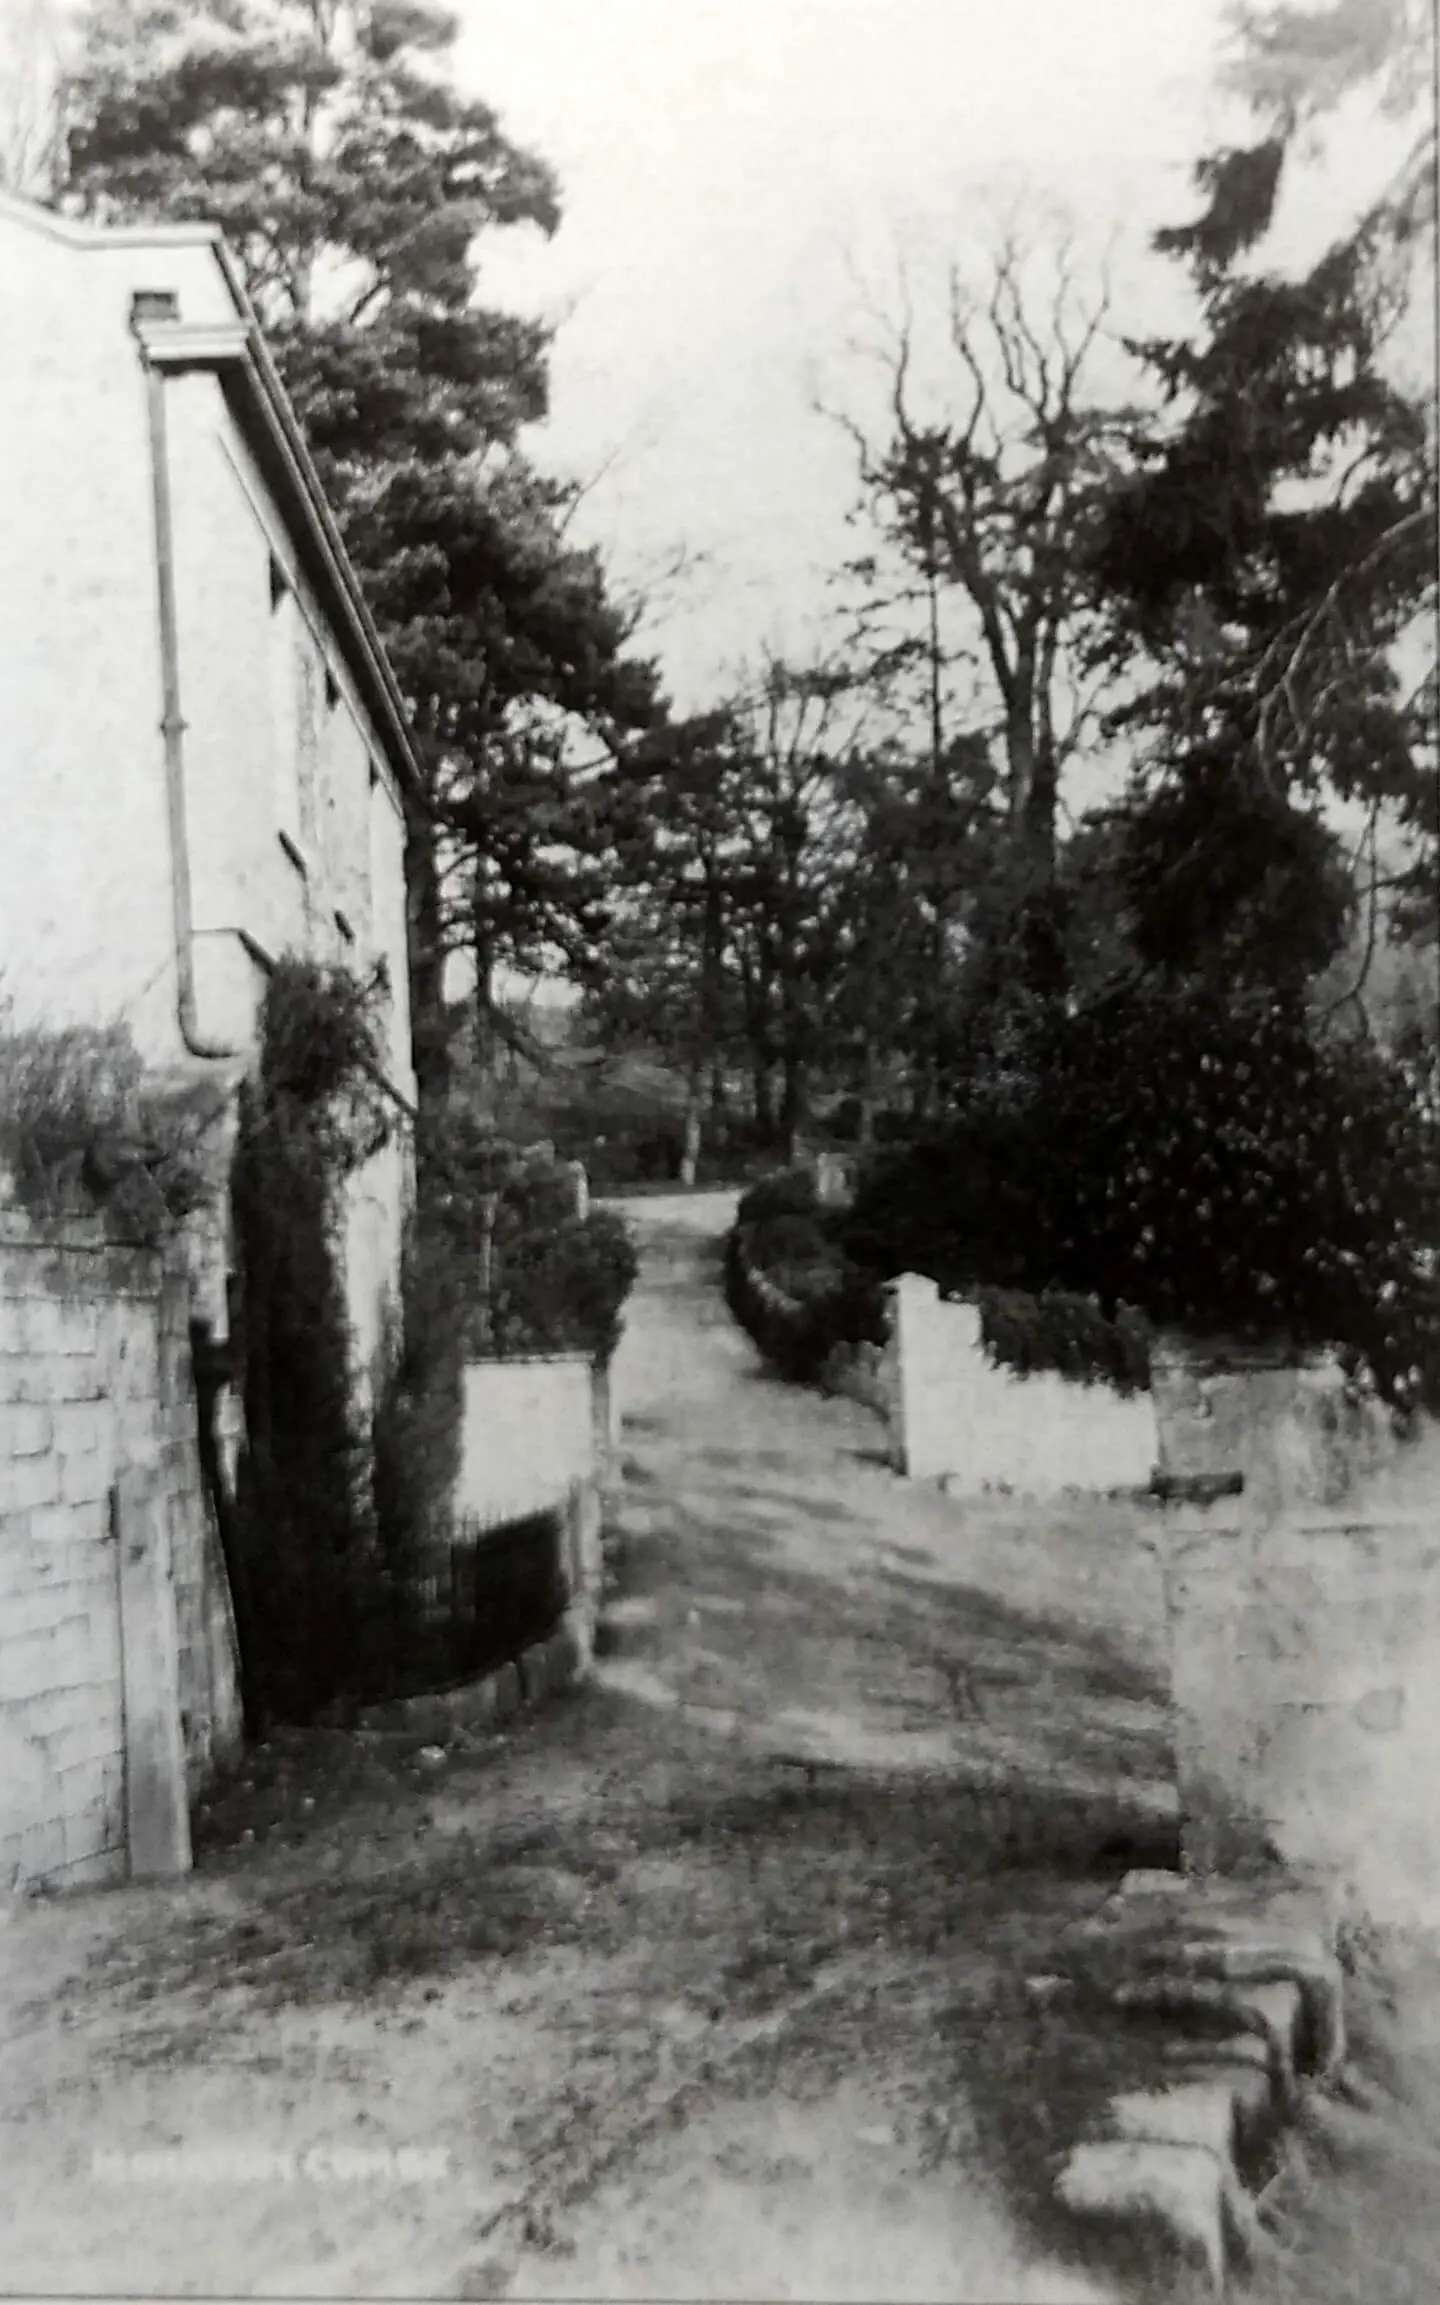 Combe Grove farmhouse about 1905